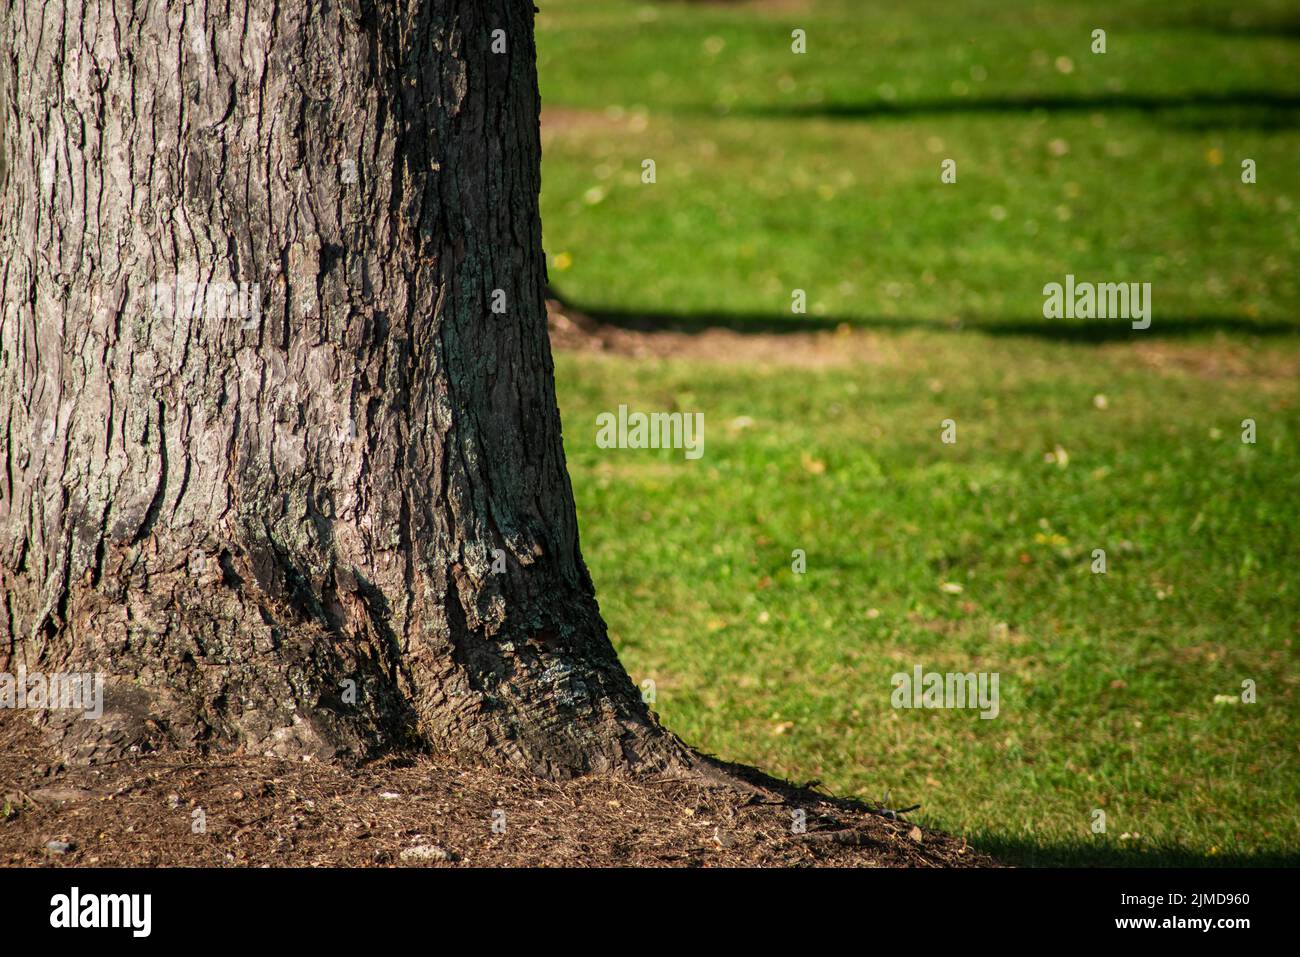 Rough textured tree bark off center in soft green grass. Copy space. Stock Photo